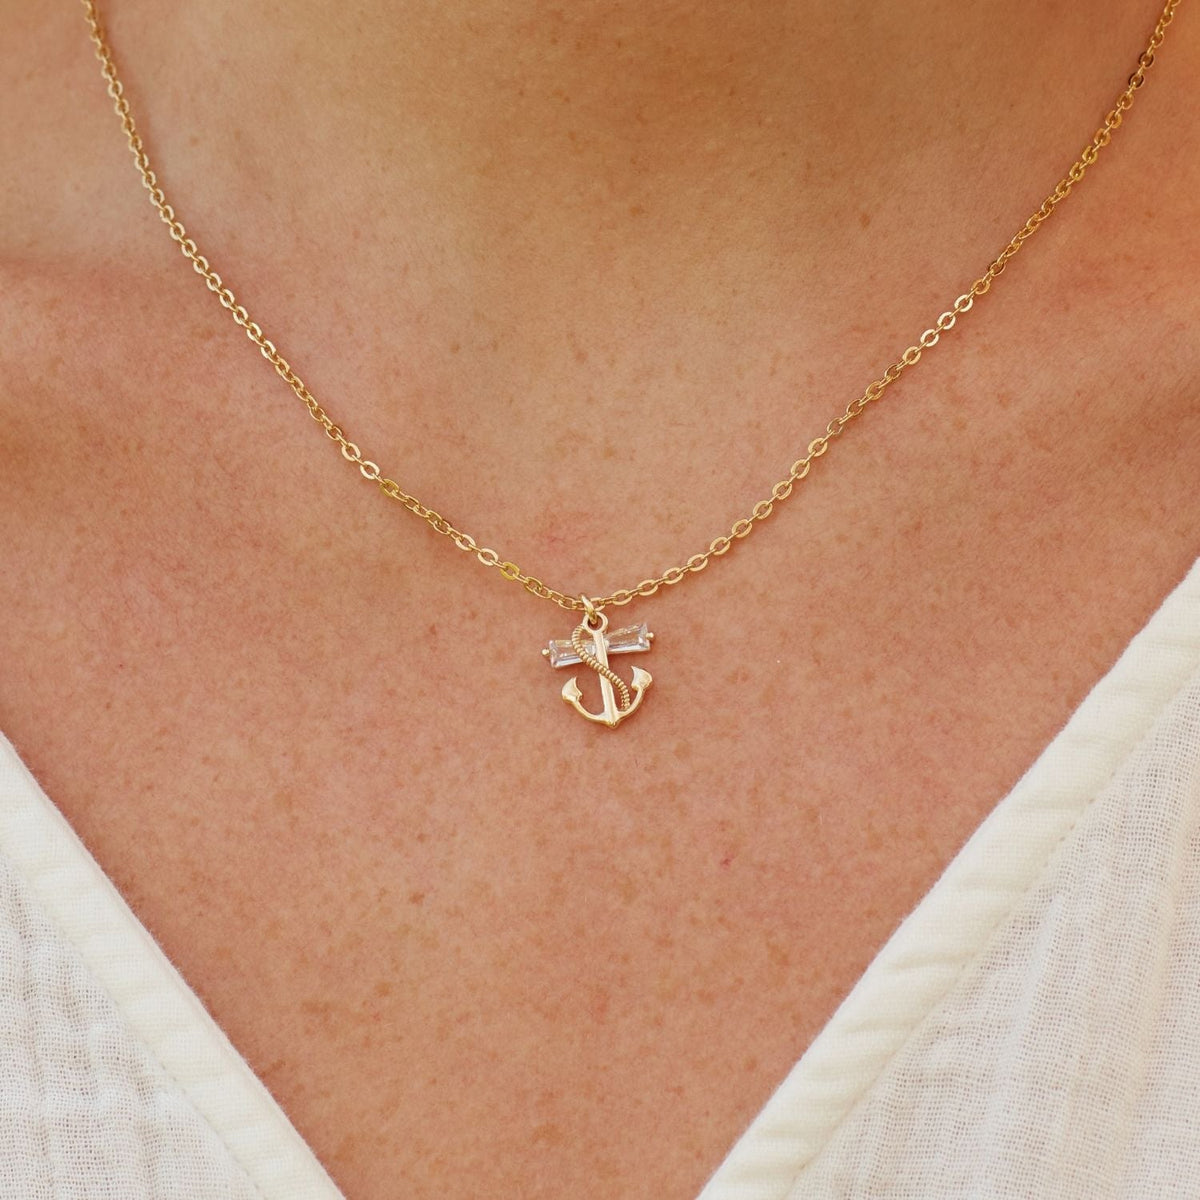 To My Beautiful Daughter | Amazing Woman God Has Made You | Anchor Necklace